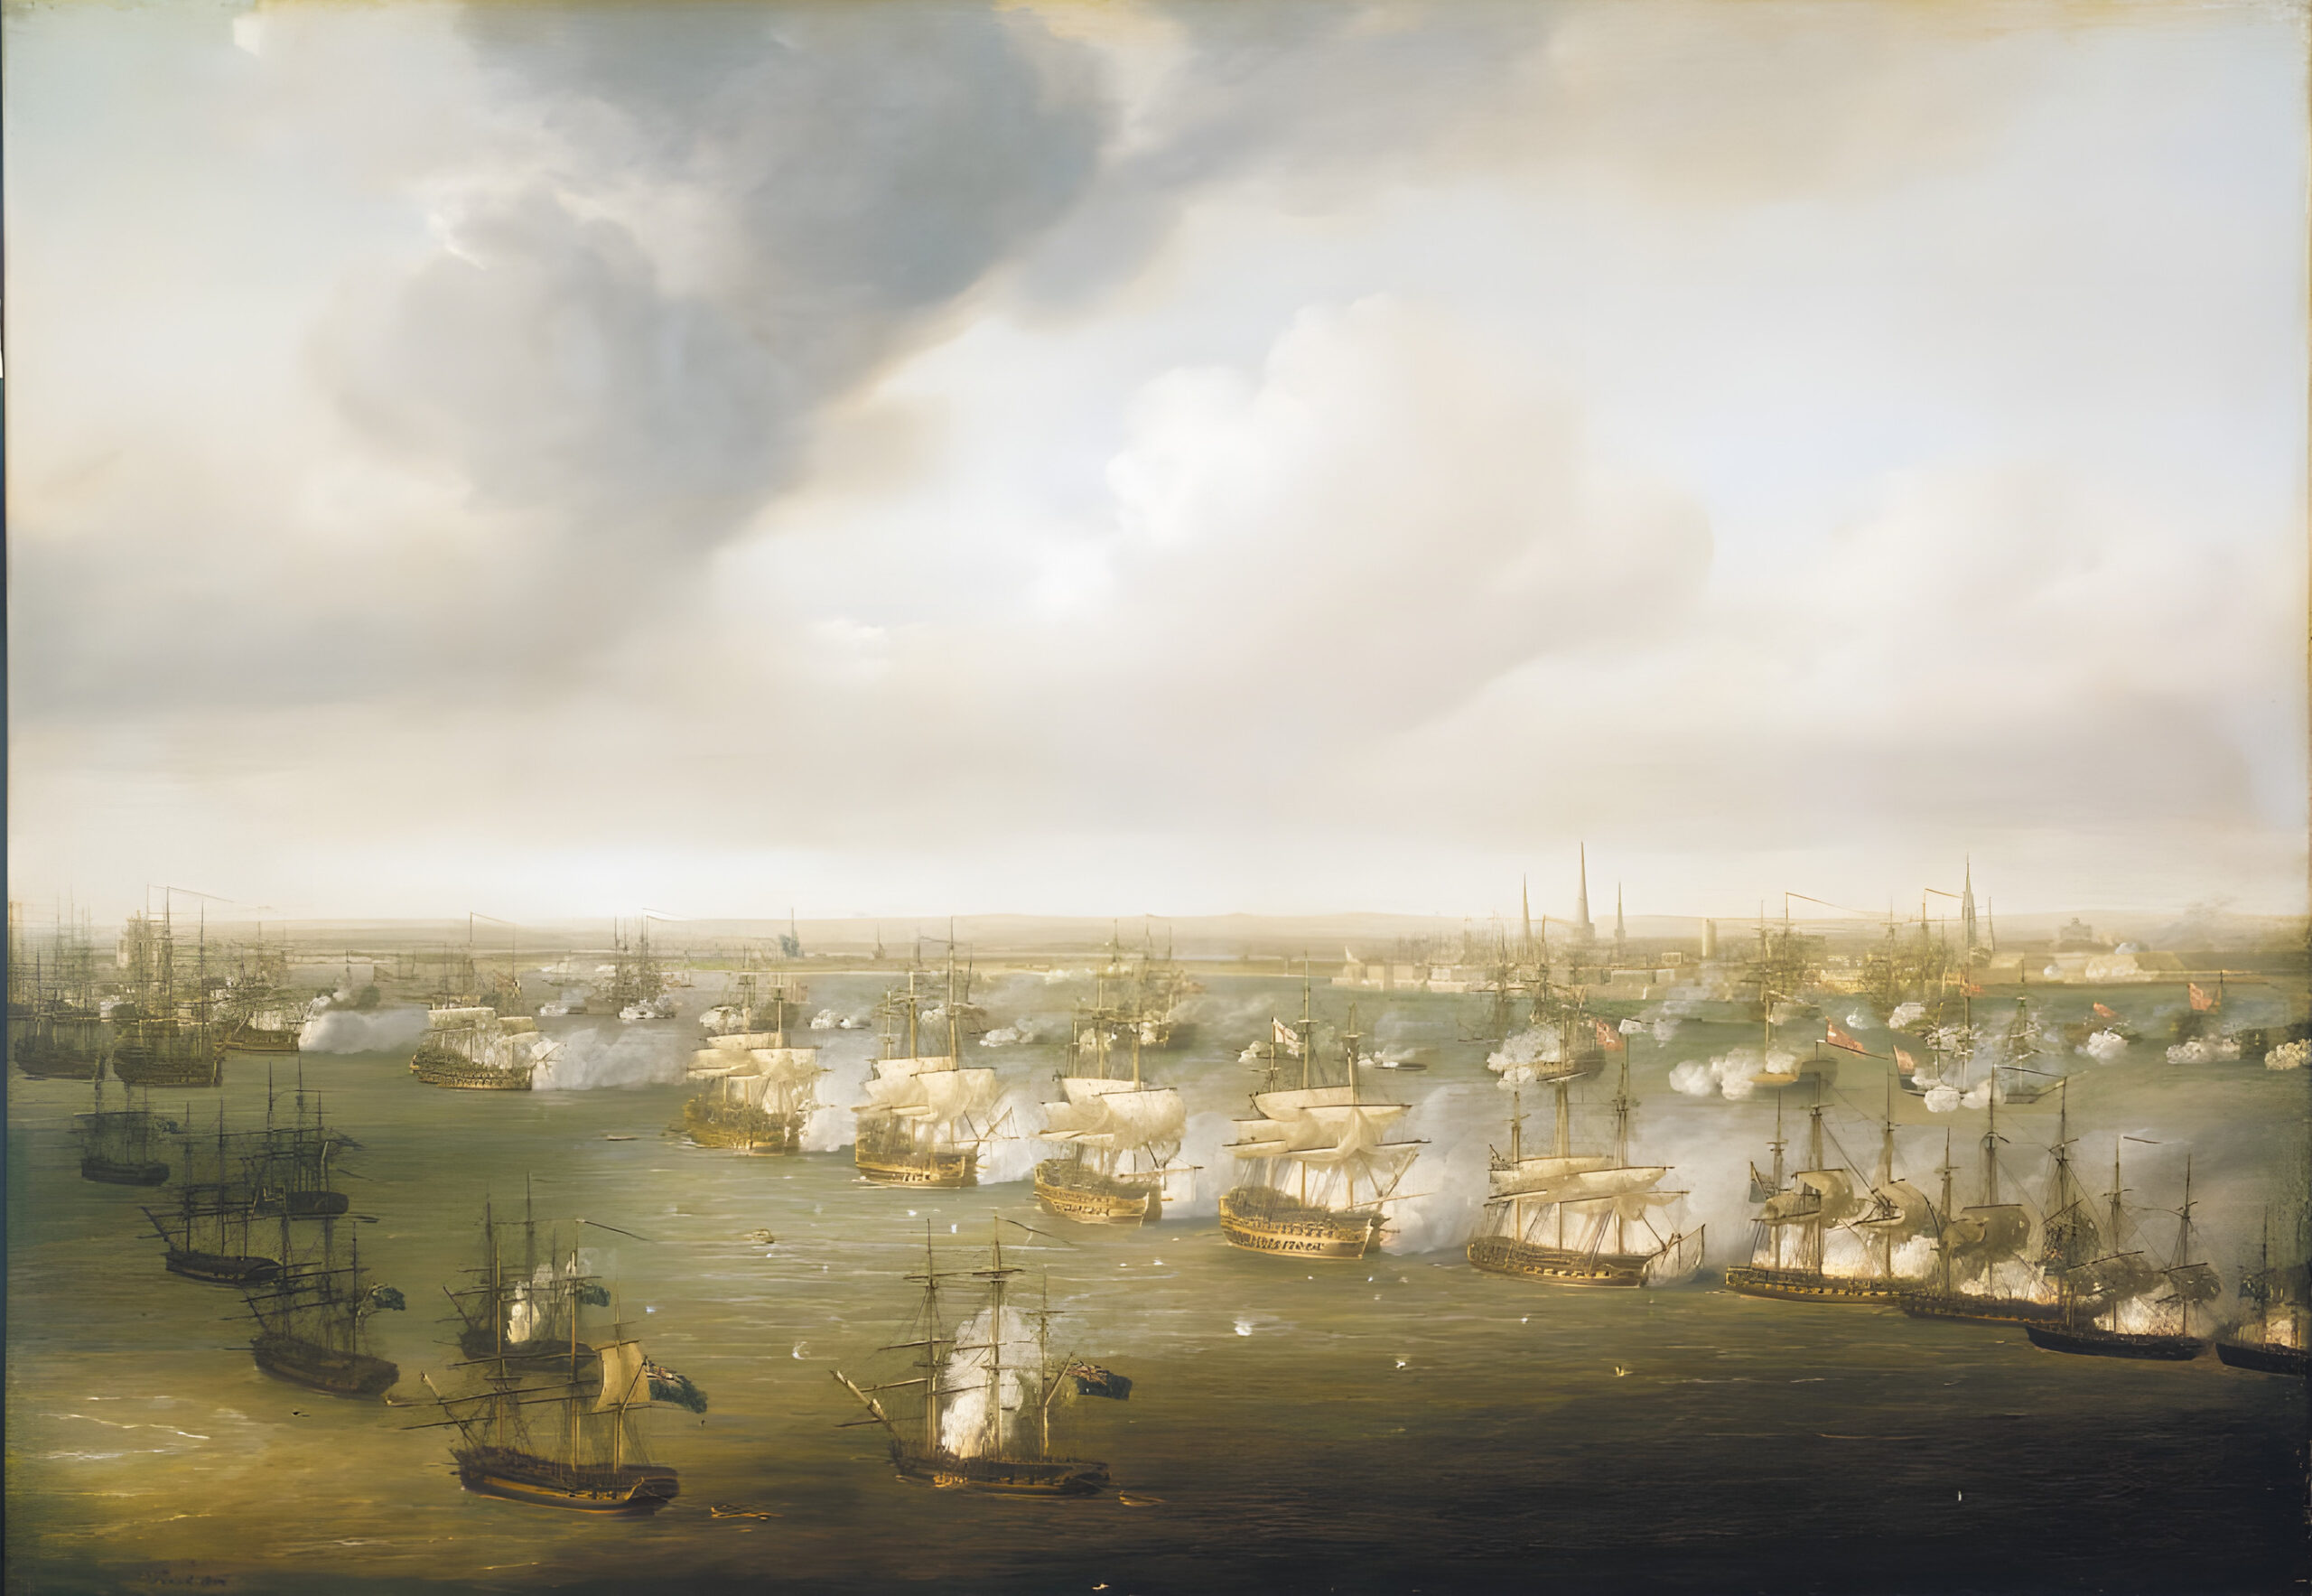 The British fleet was powerful, but so was the Danish array, and a shift of the wind could leave the British ships at a disadvantage.